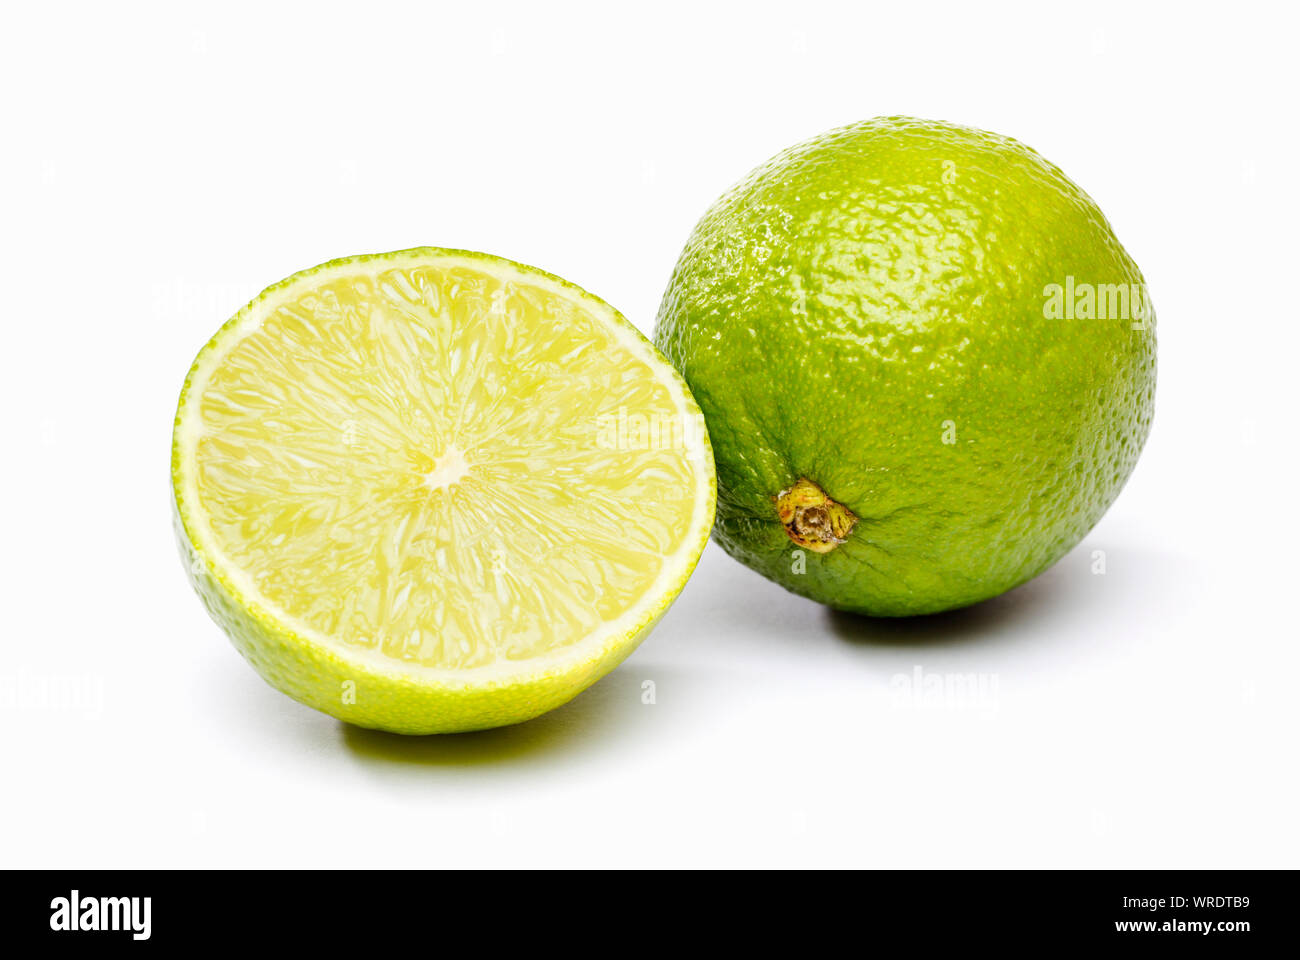 Green Lime, one whole and one half Limes on a white background Stock Photo